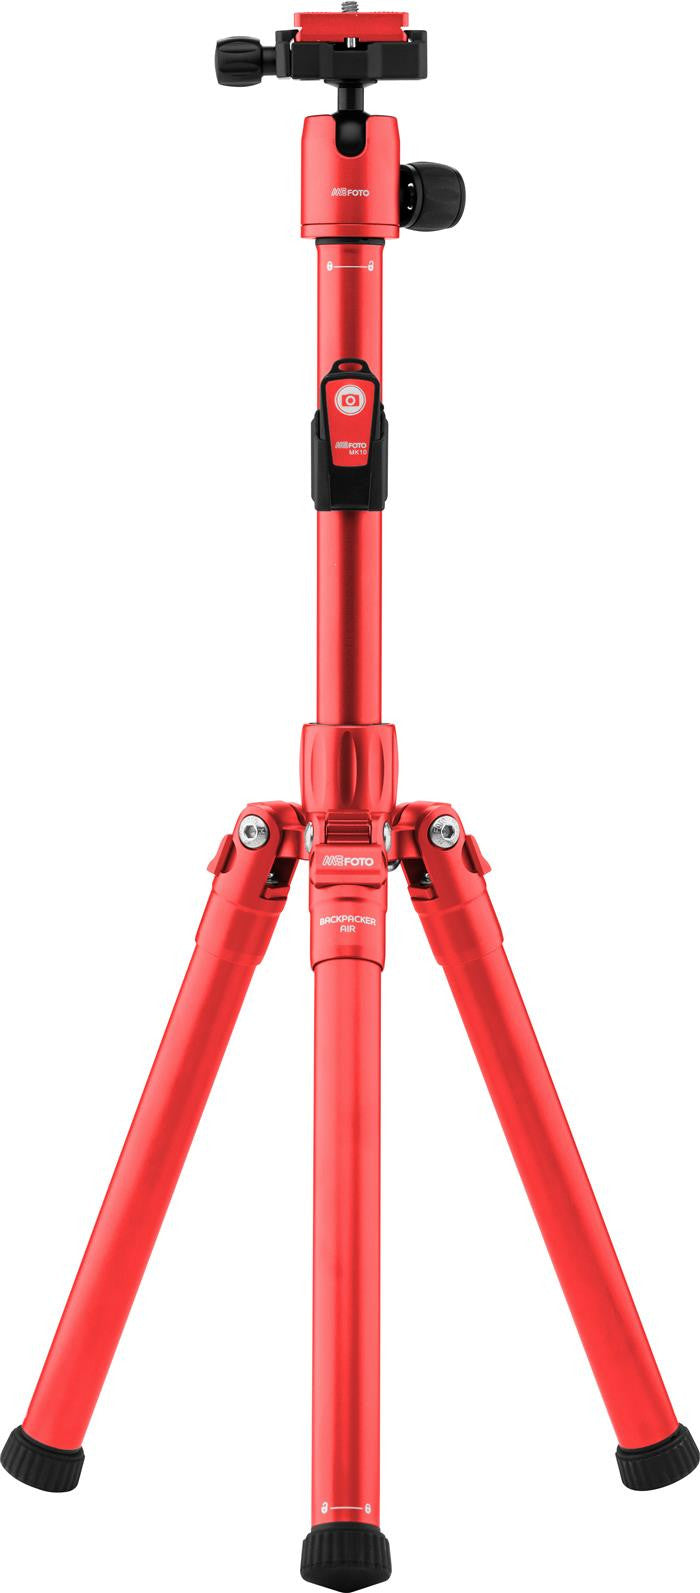 MeFOTO BackPacker Air Tripod Kit (Red), tripods travel & compact, MeFOTO - Pictureline  - 2